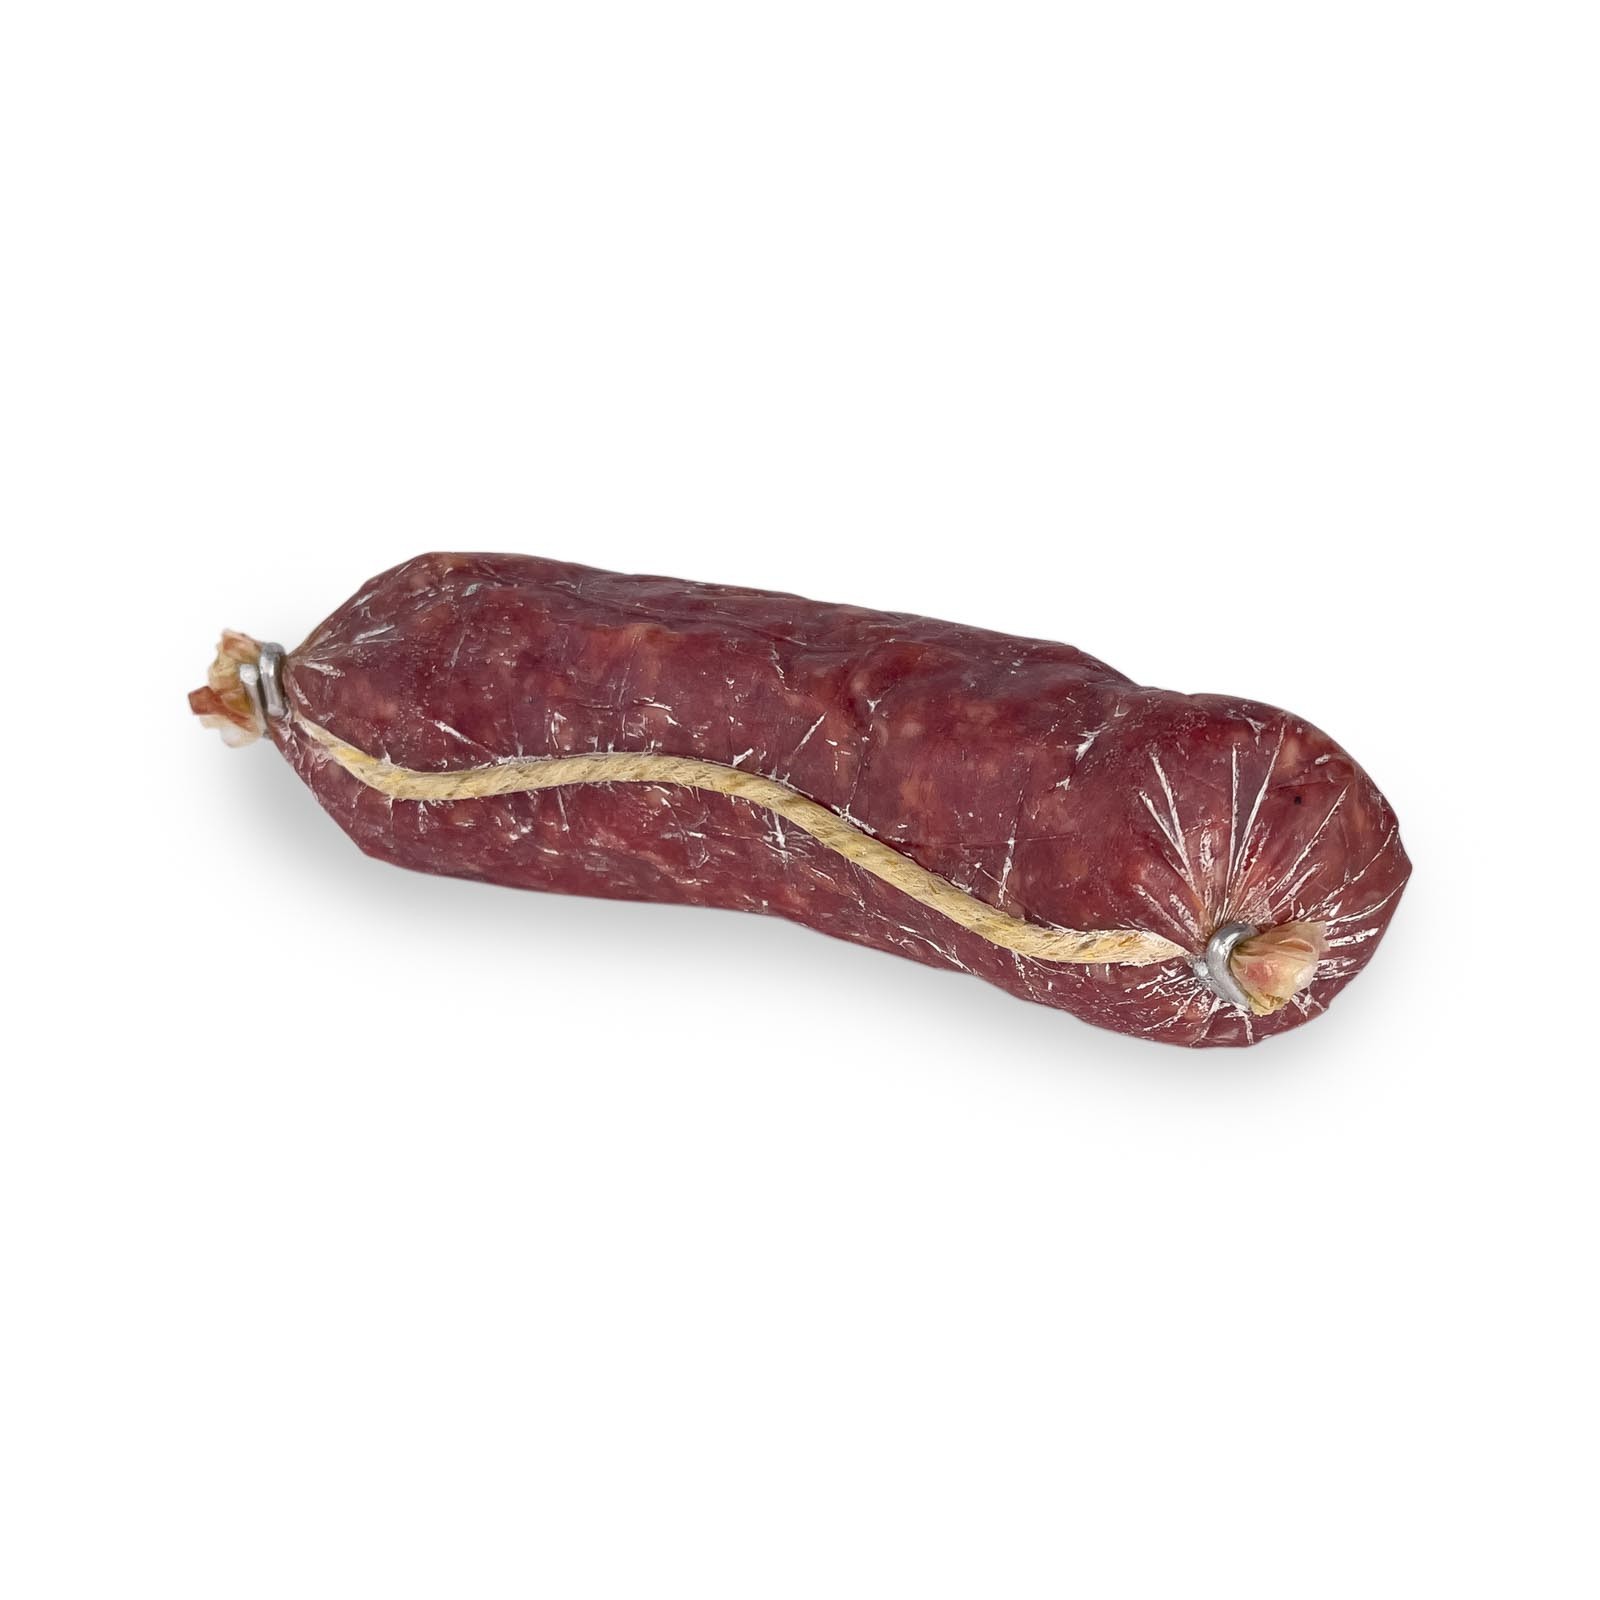 Garlic Salami is a traditional medium-ground artisan salami flavored with garlic, stuffed into natural pork casing, tied by hand and seasoned naturally.